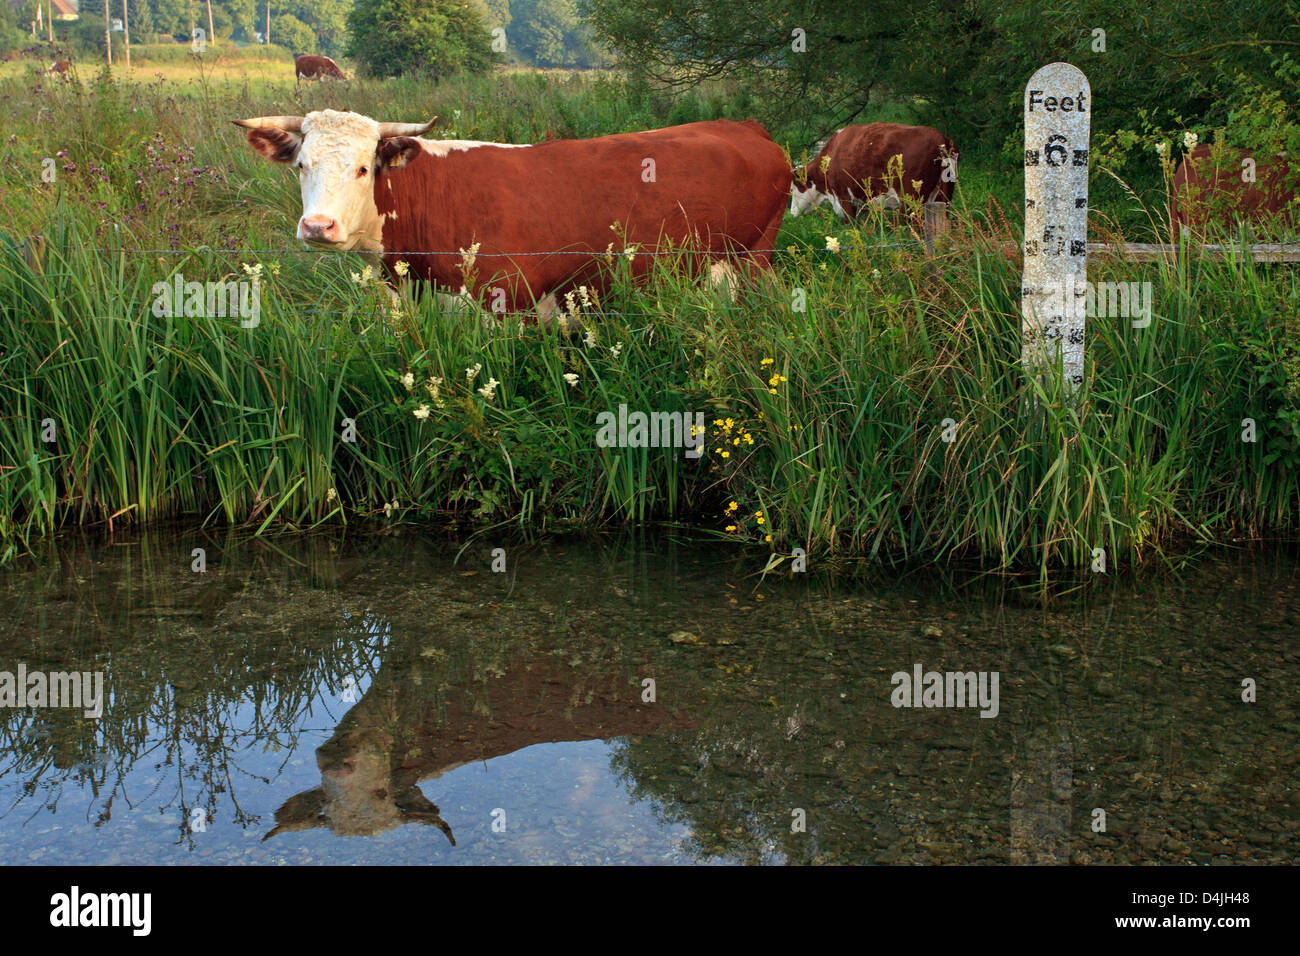 Horned Hereford cow standing in a field besides a river with a depth marker, it's reflection in the still water. Stock Photo